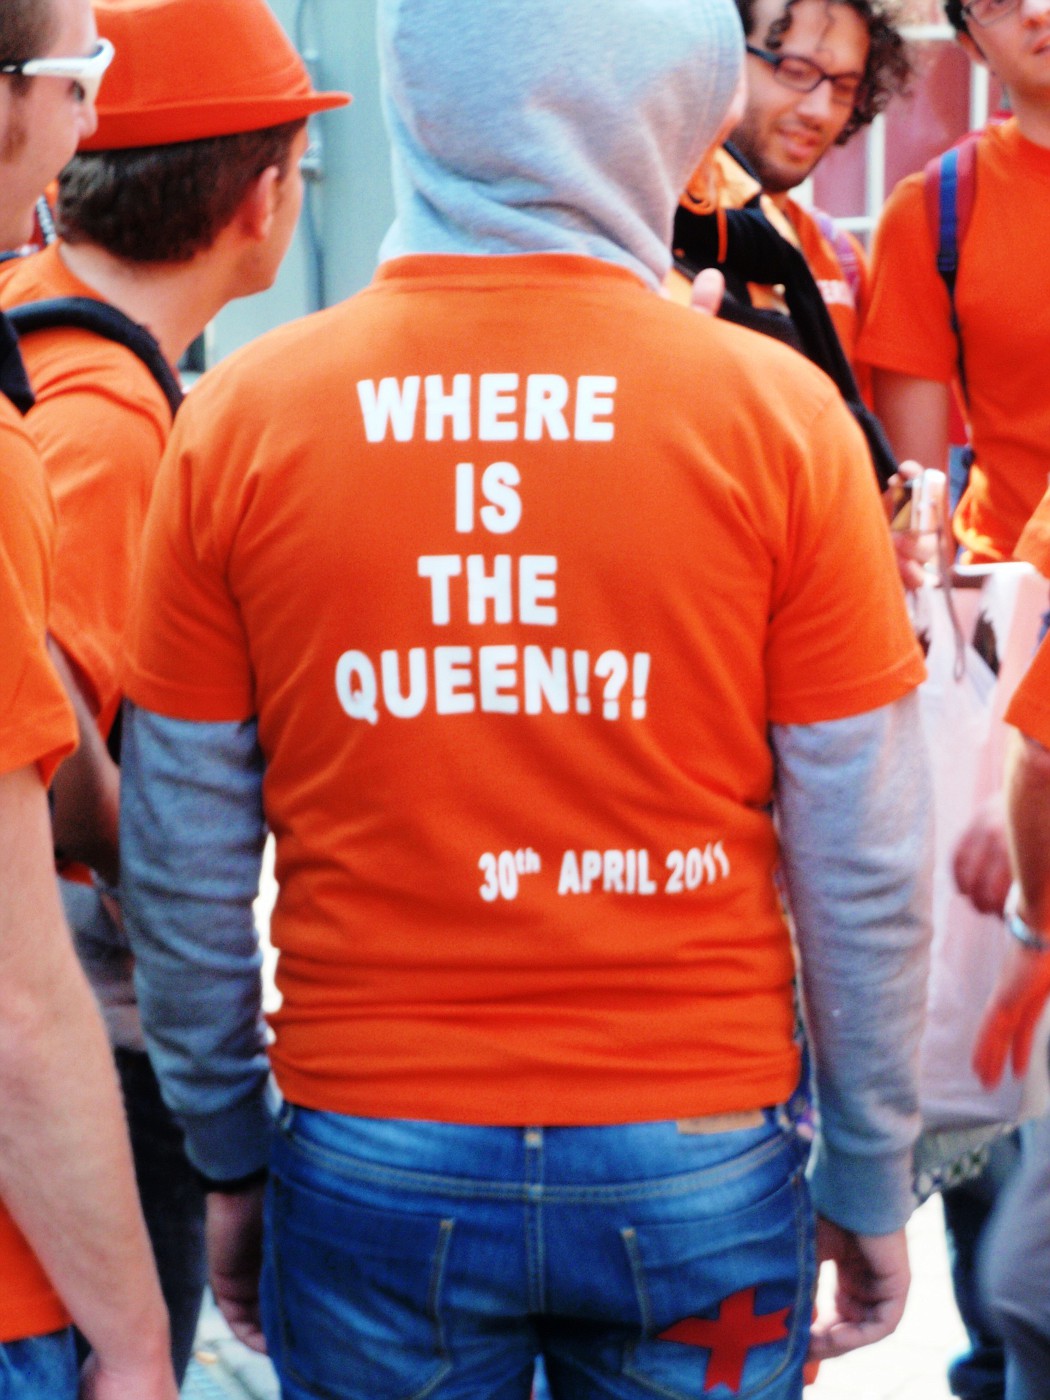 Where is the Queen?